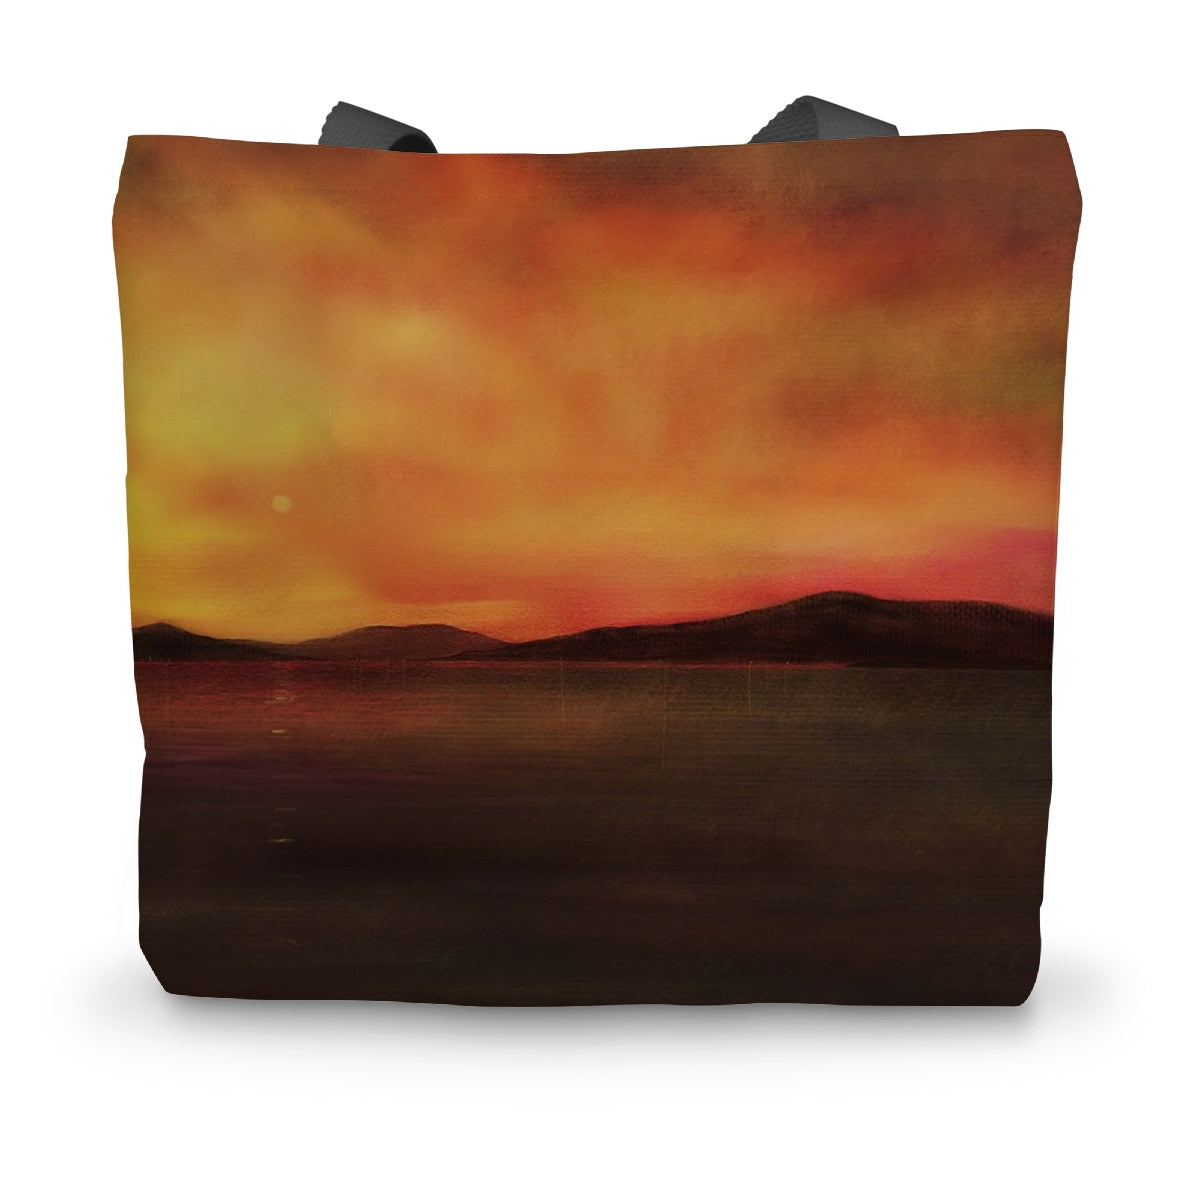 Harris Sunset Art Gifts Canvas Tote Bag-Bags-Hebridean Islands Art Gallery-14"x18.5"-Paintings, Prints, Homeware, Art Gifts From Scotland By Scottish Artist Kevin Hunter